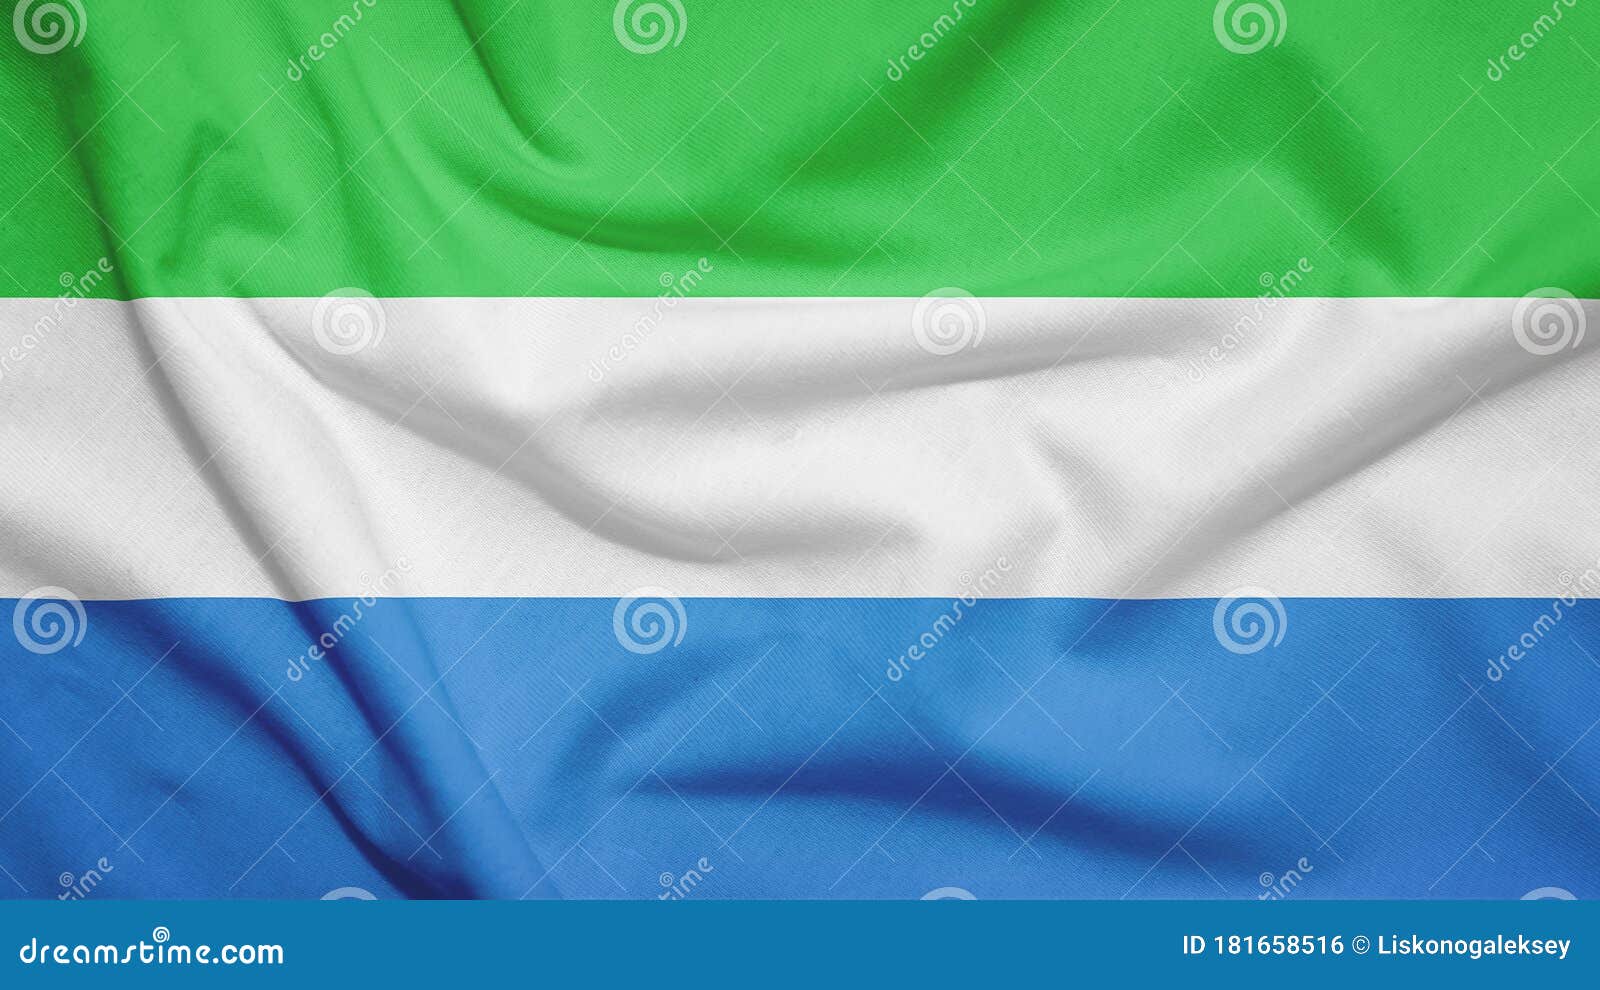 sierra leone flag with fabric texture